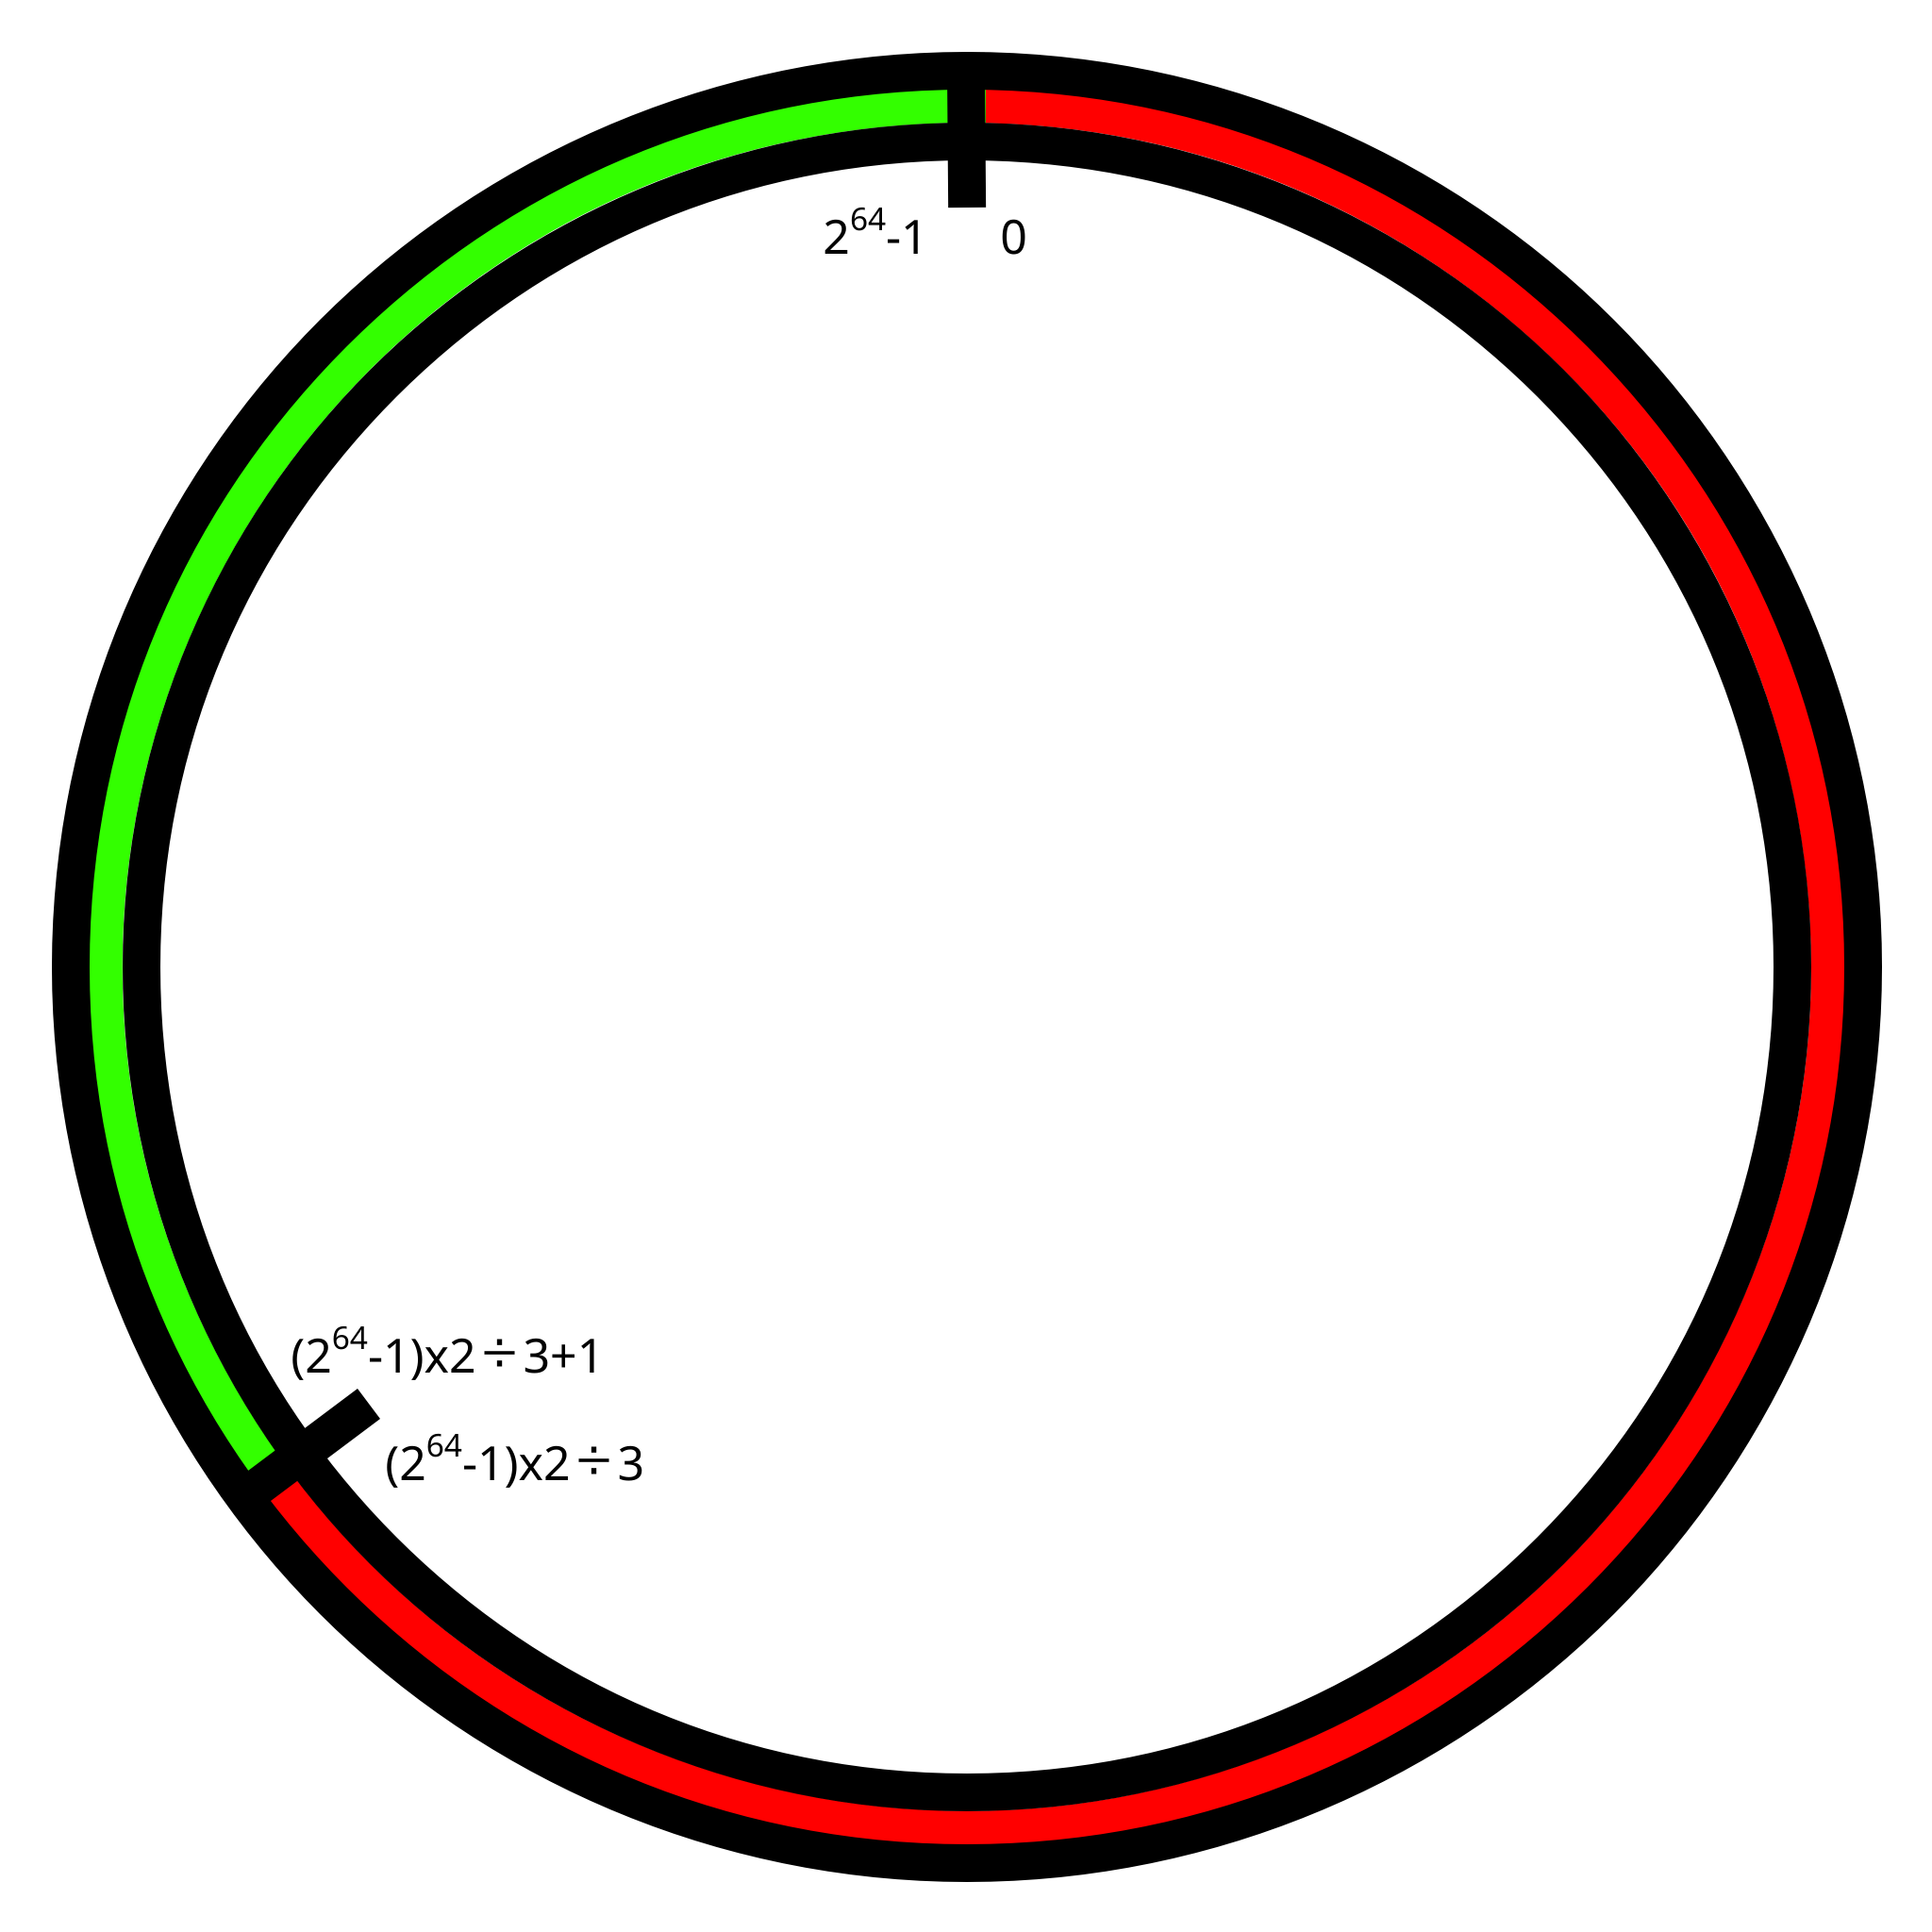 A ring with regions between 0 to 2 thirds of its span selected in red, and the rest selected in green